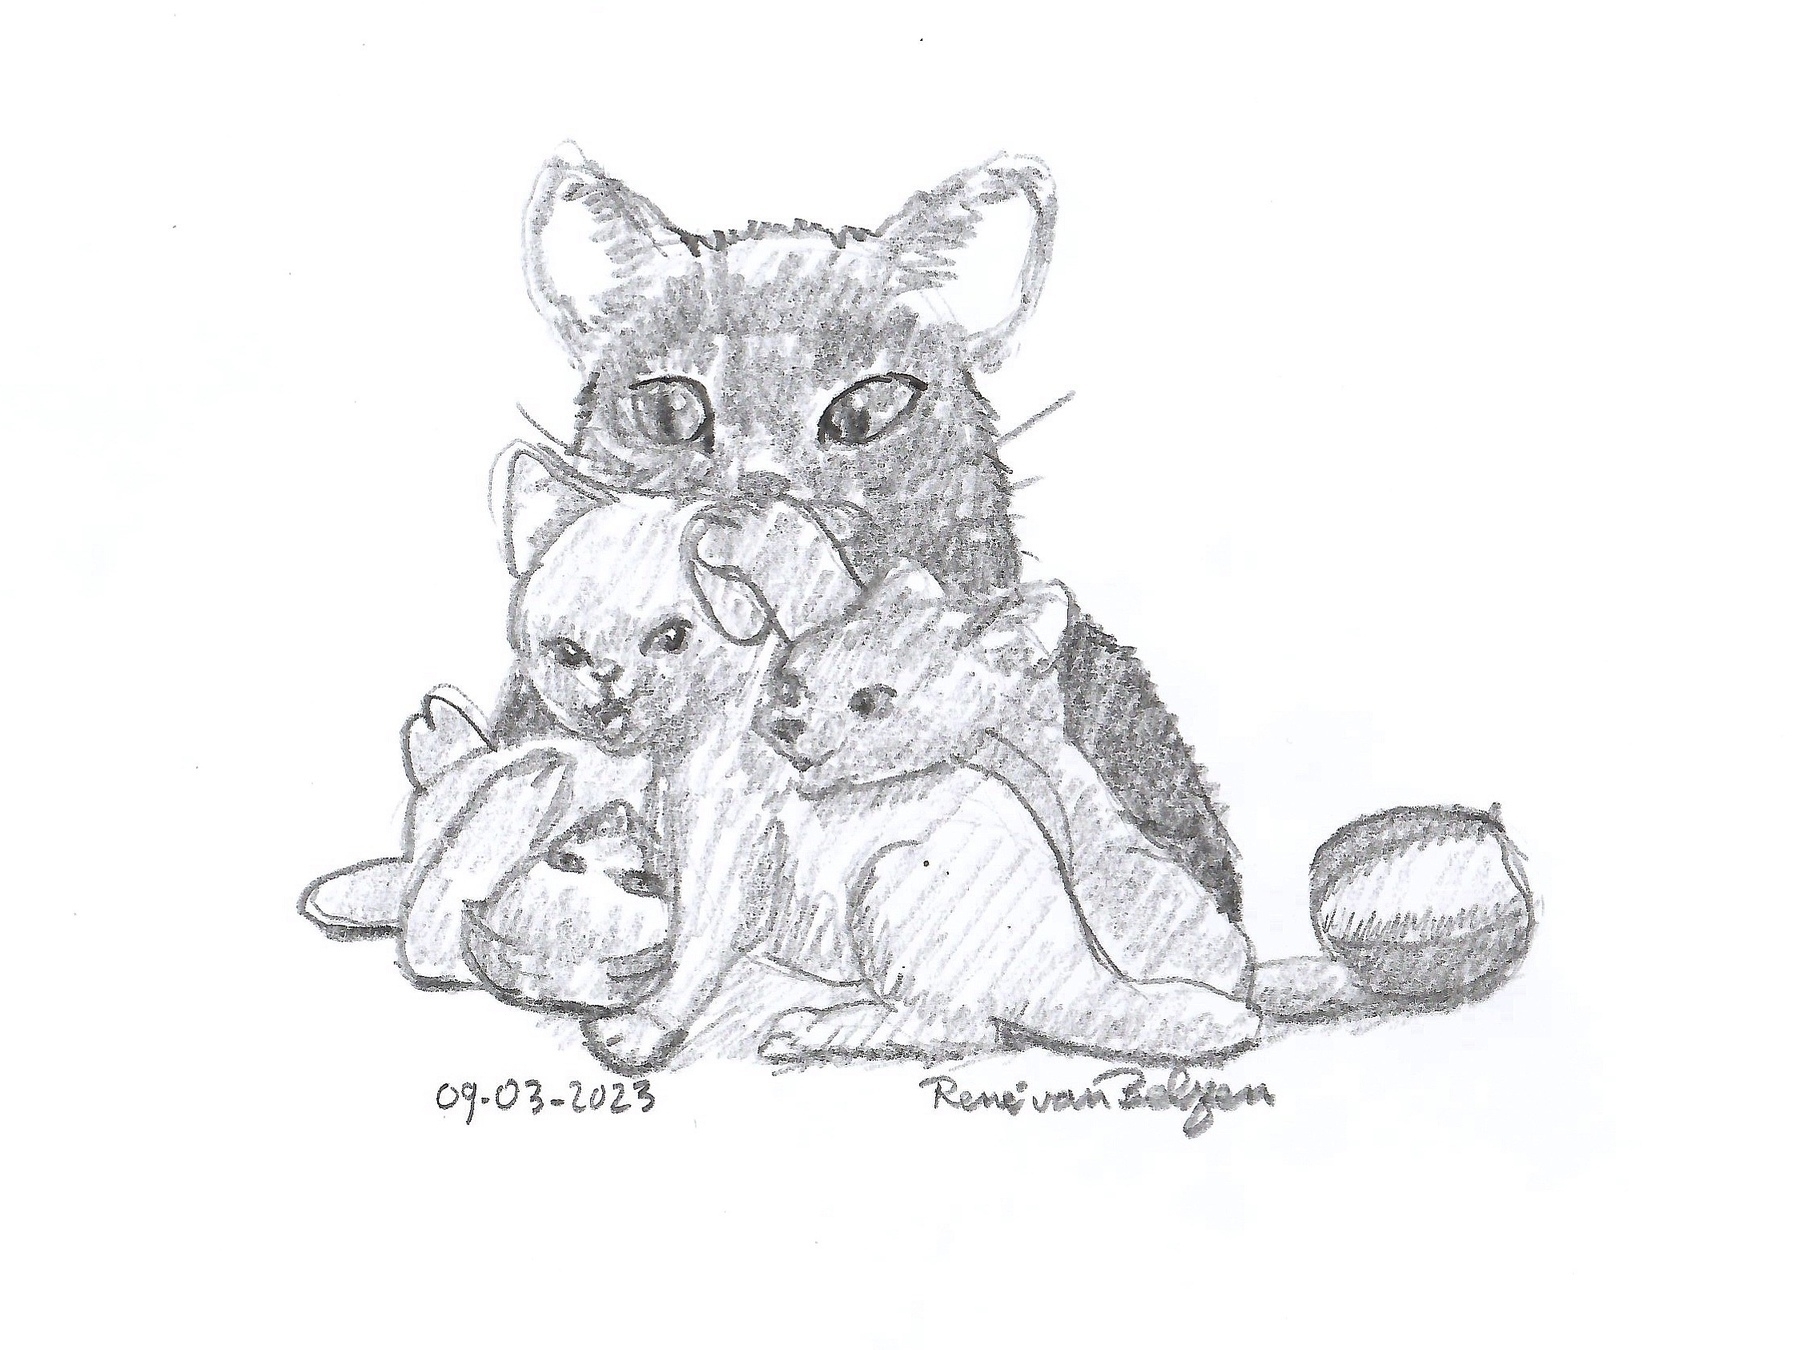 pencil sketch of a litter of kittens playing together while guarded by their mom